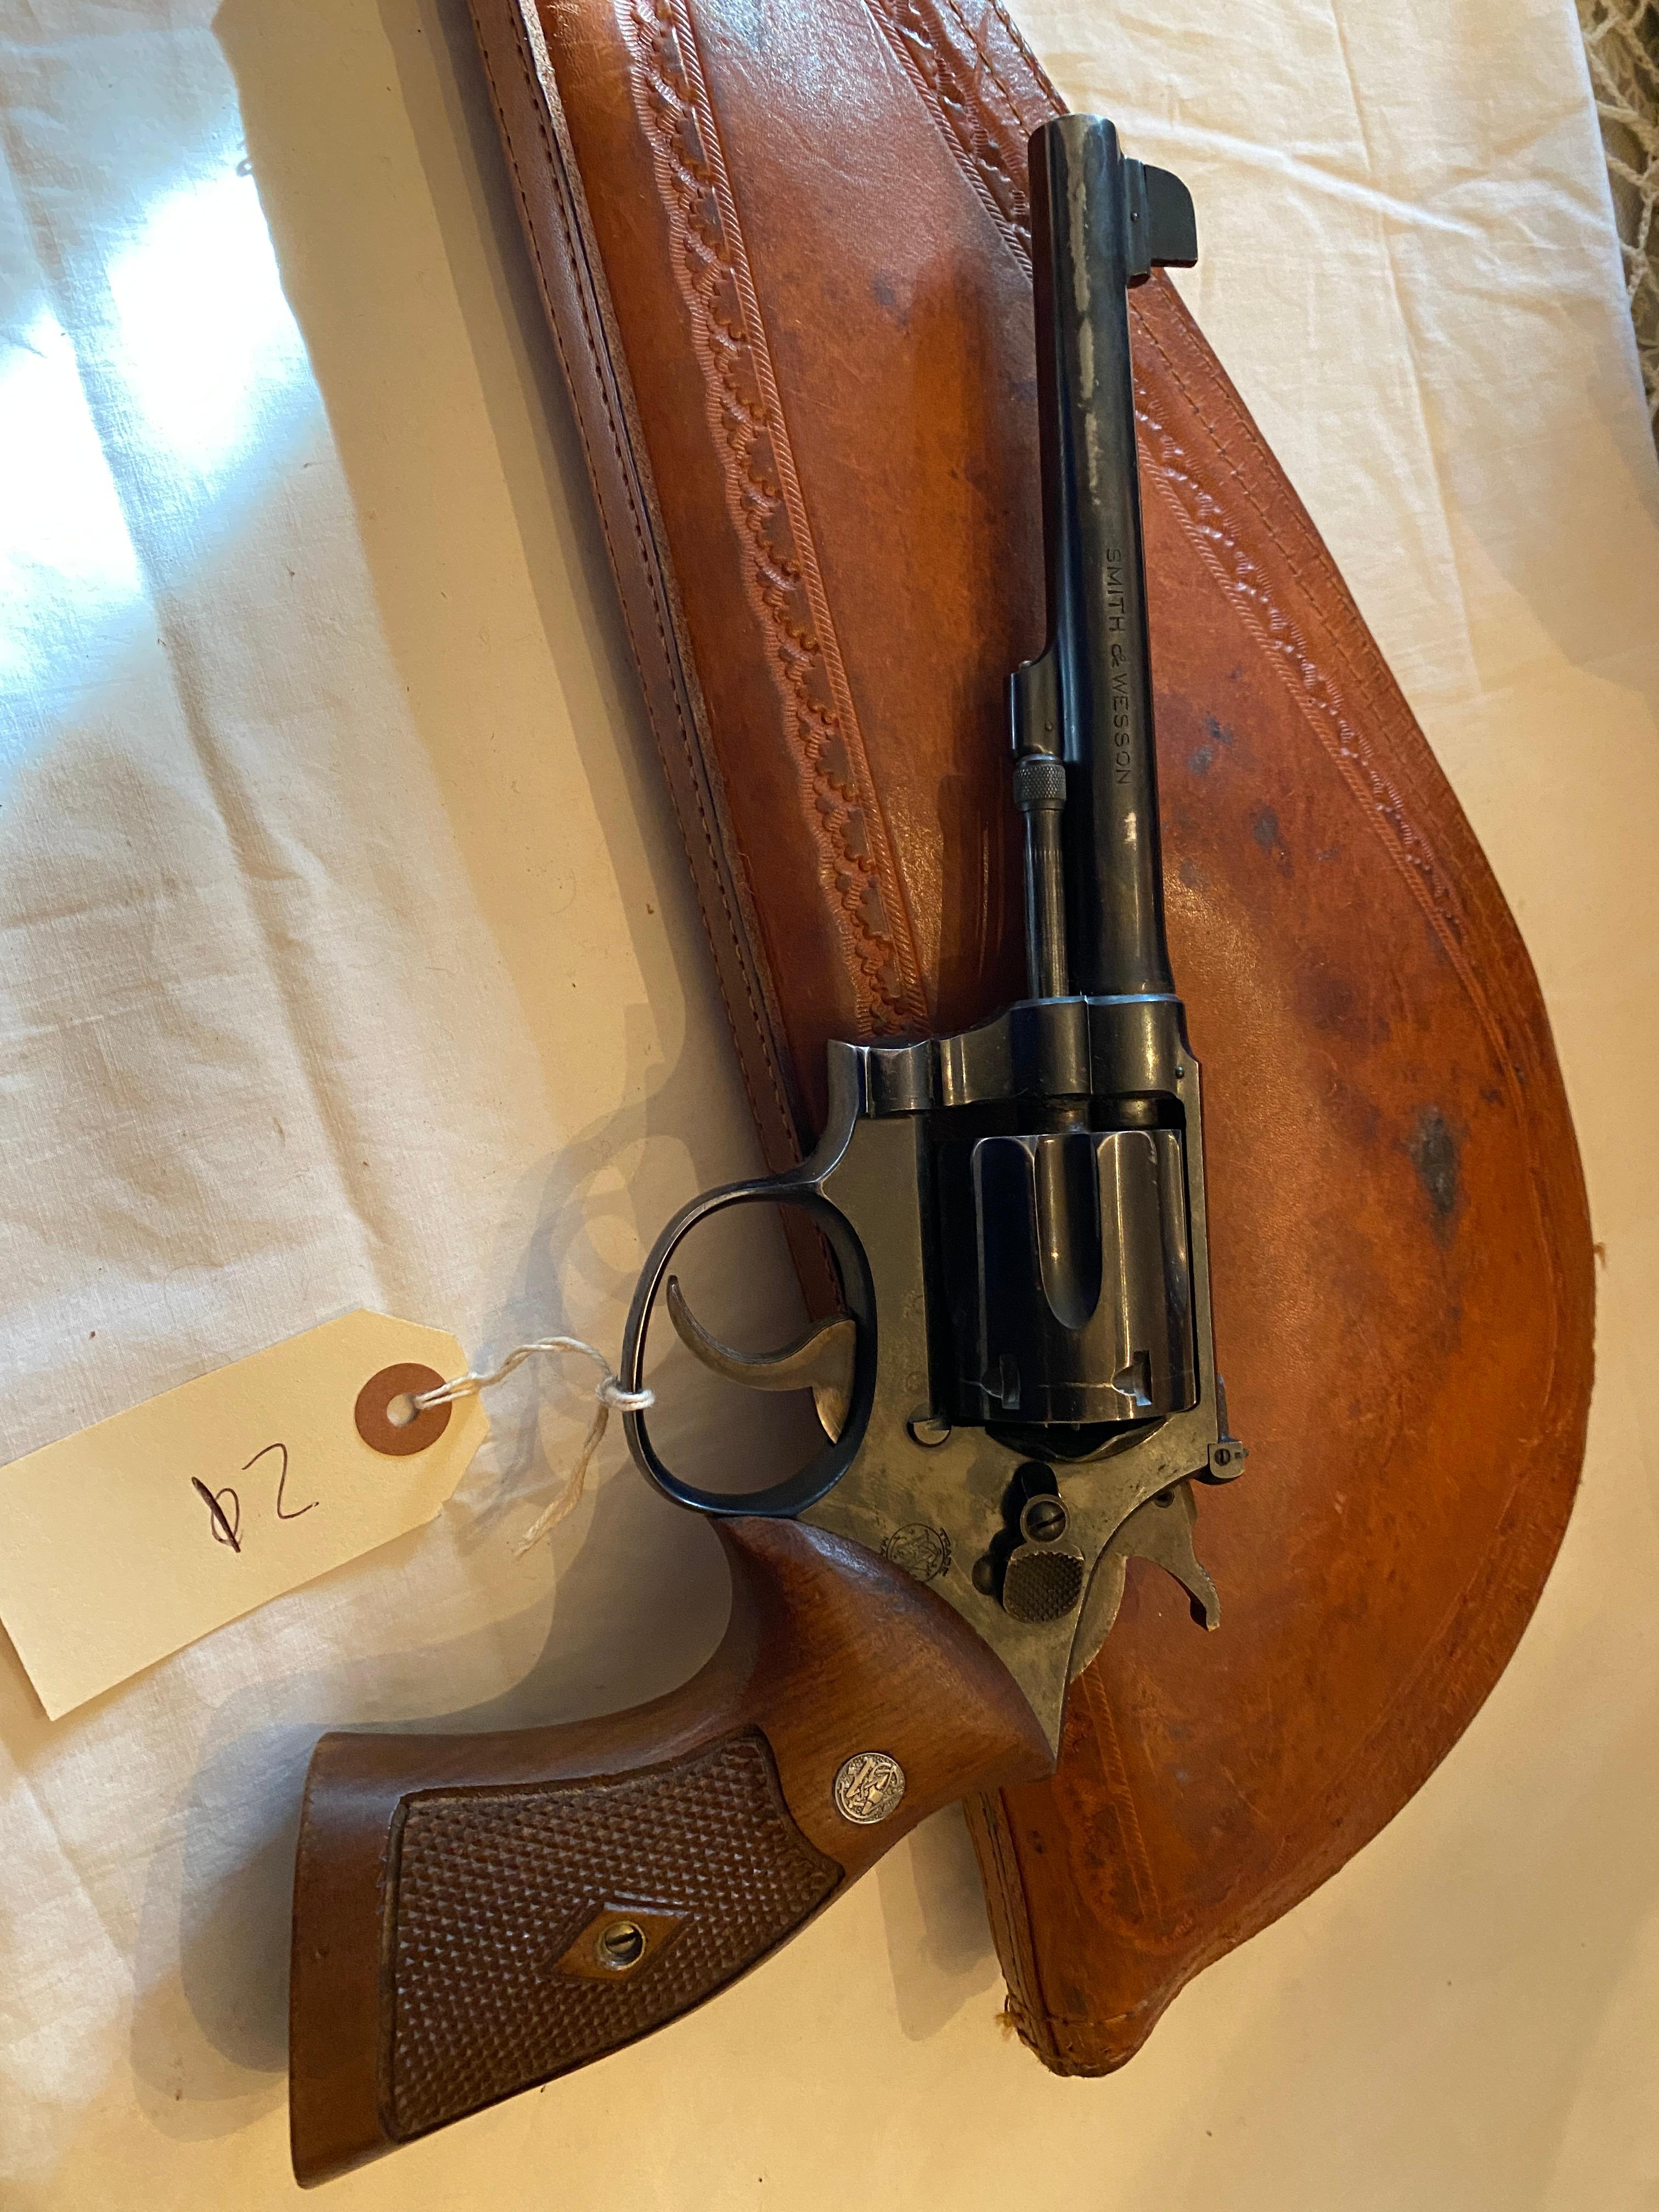 Smith & Wesson 38 special